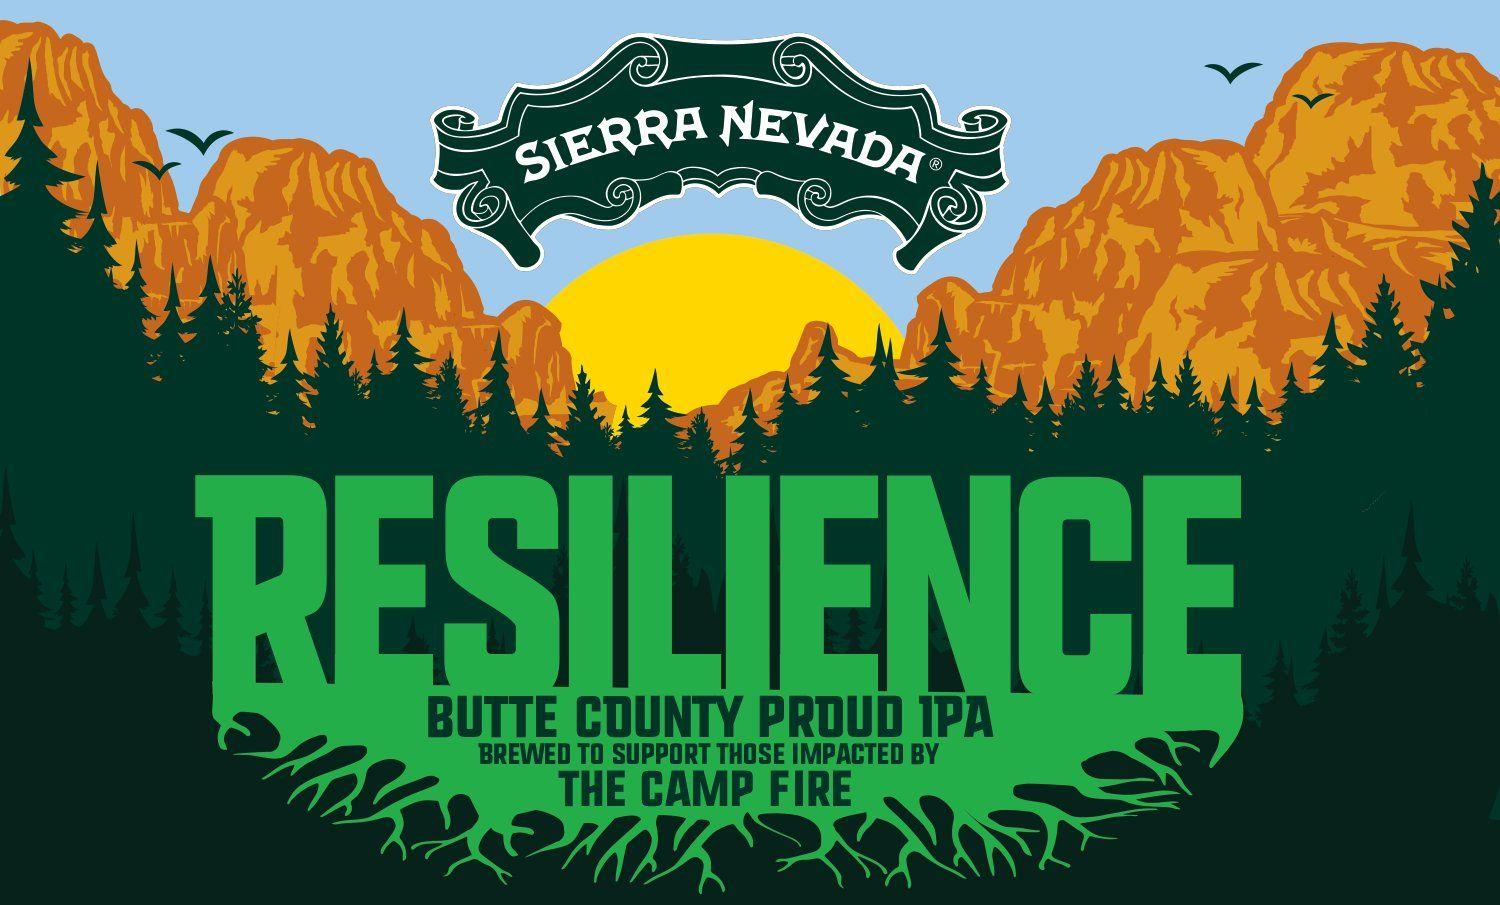 Sierra Nevada Brewing Logo - 1,000 Brewers Plan to Make the Exact Same Beer for Charity | Fortune